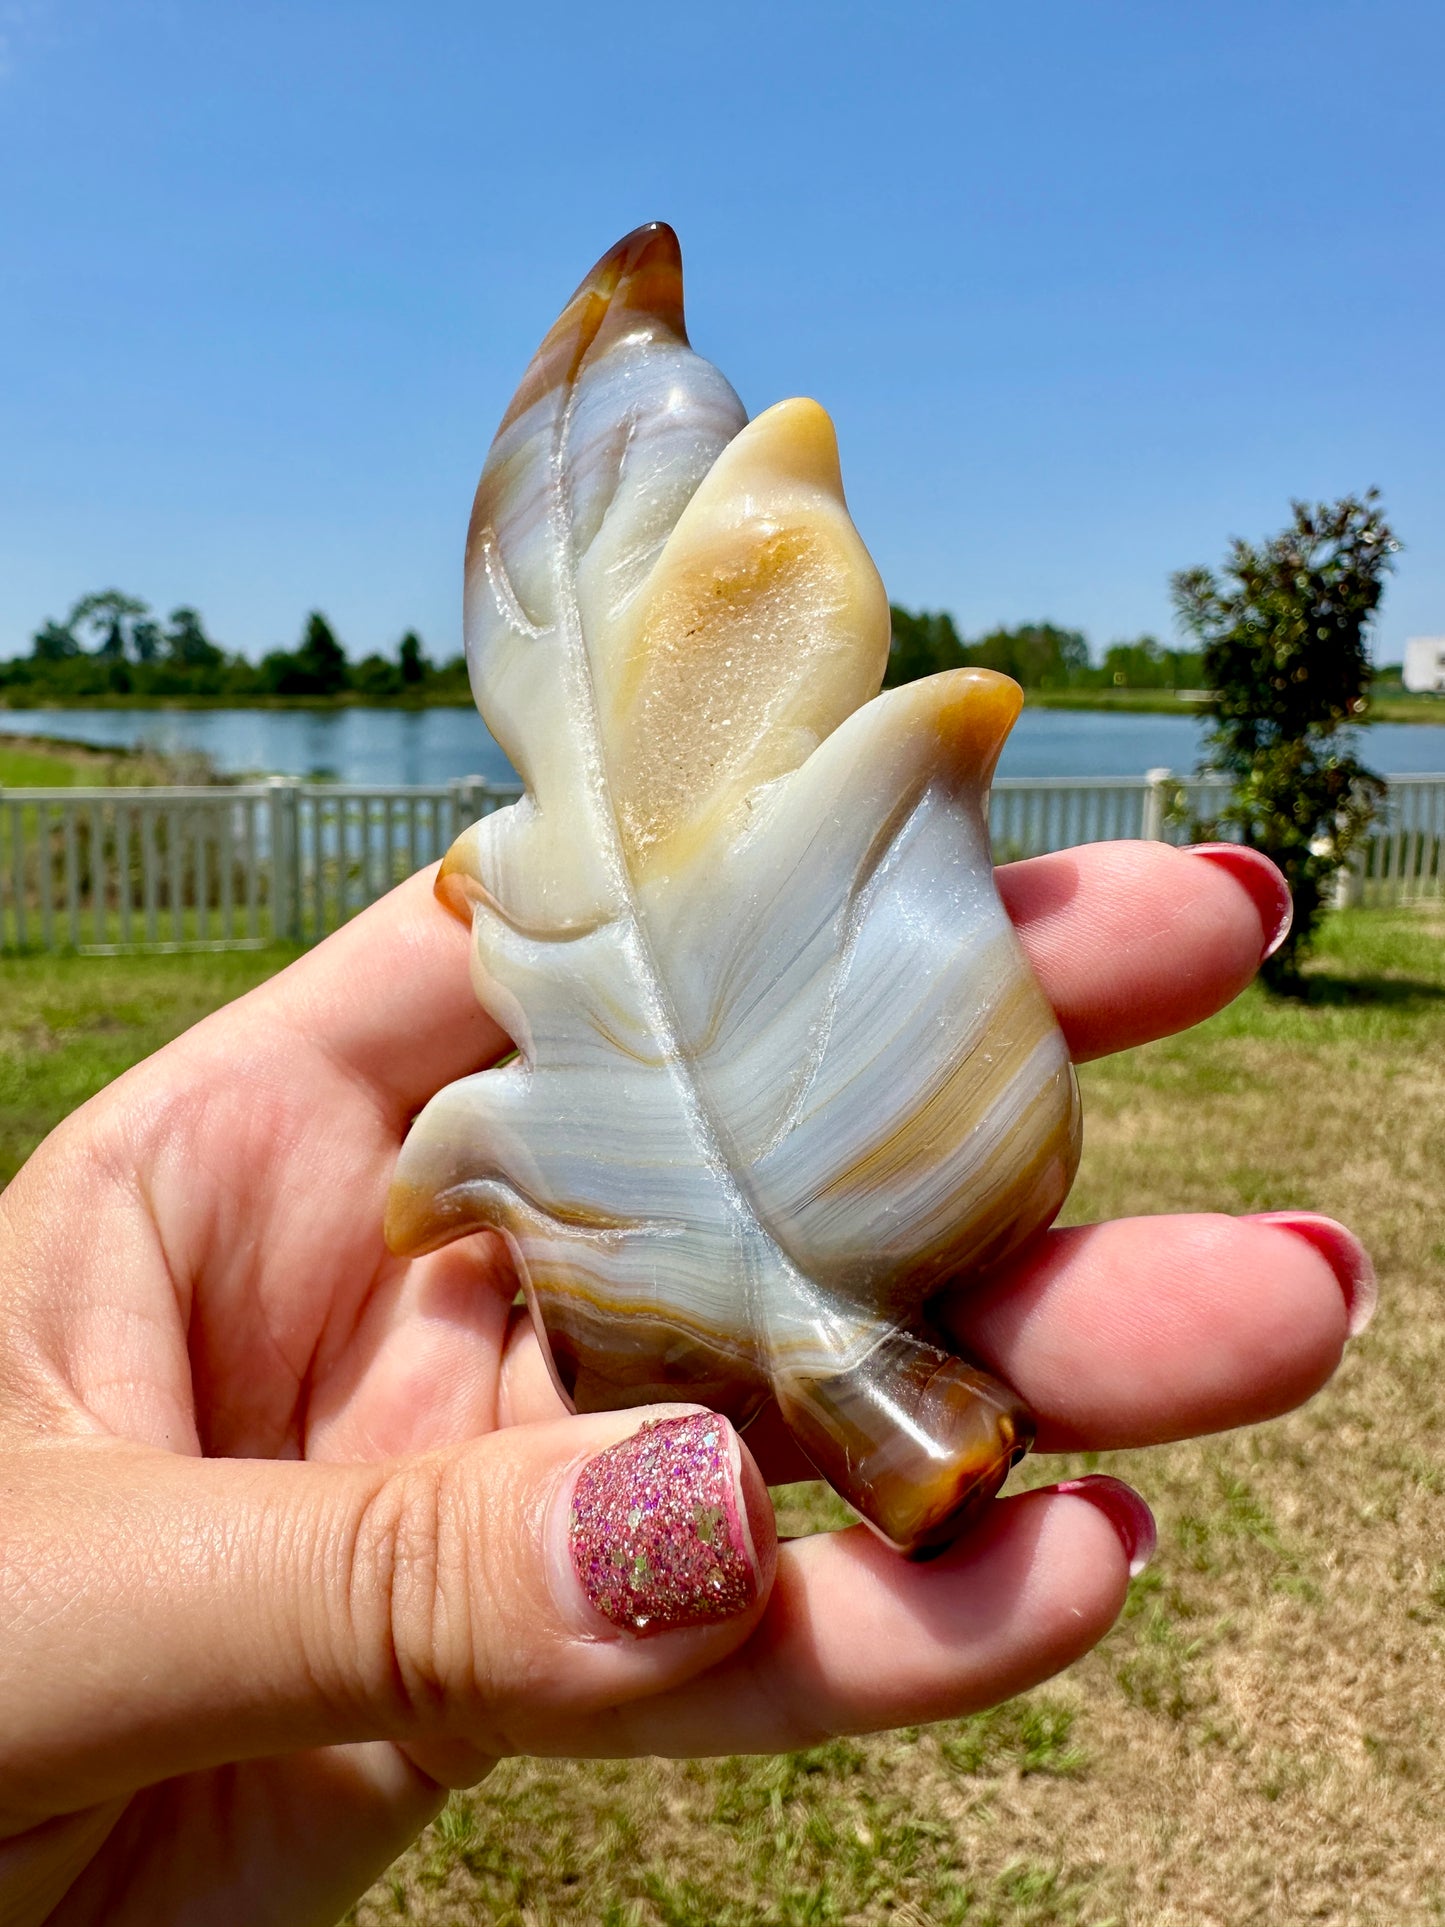 Exquisite Druzy Agate Leaf Carving – Natural Stone Ornament for Positive Energy and Home Decor – Unique Gift